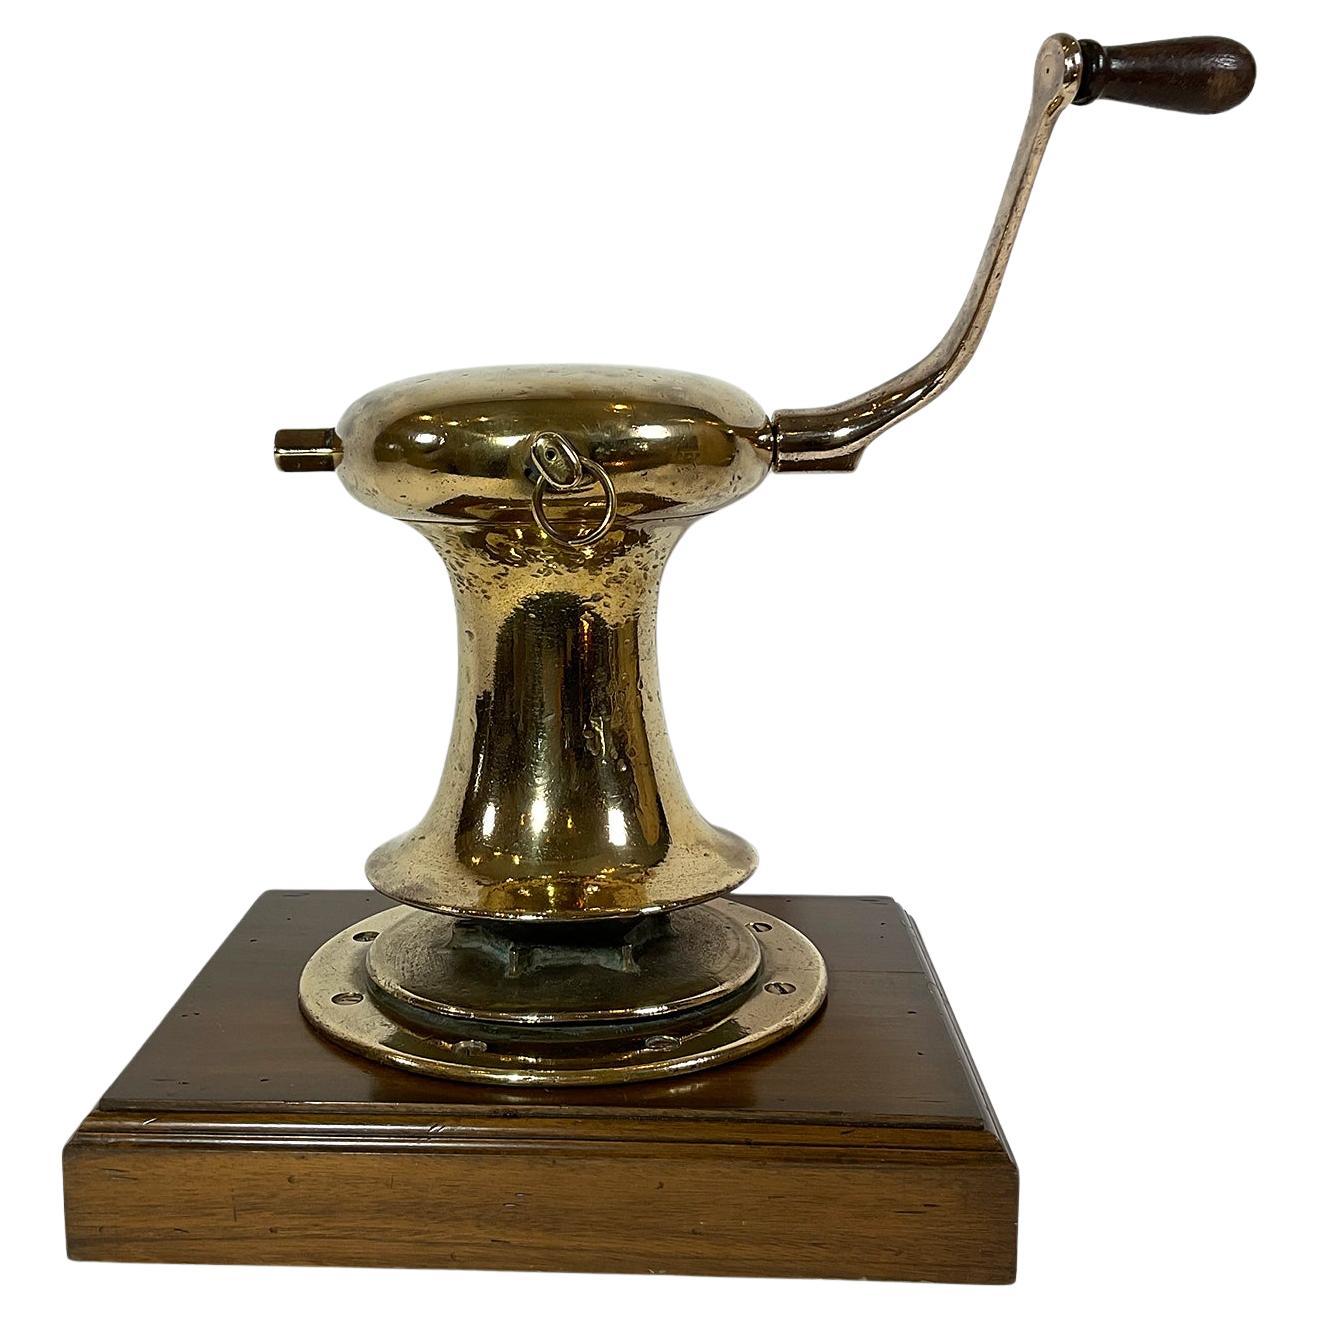 Polished Brass Yacht Capstan by Hereshoff